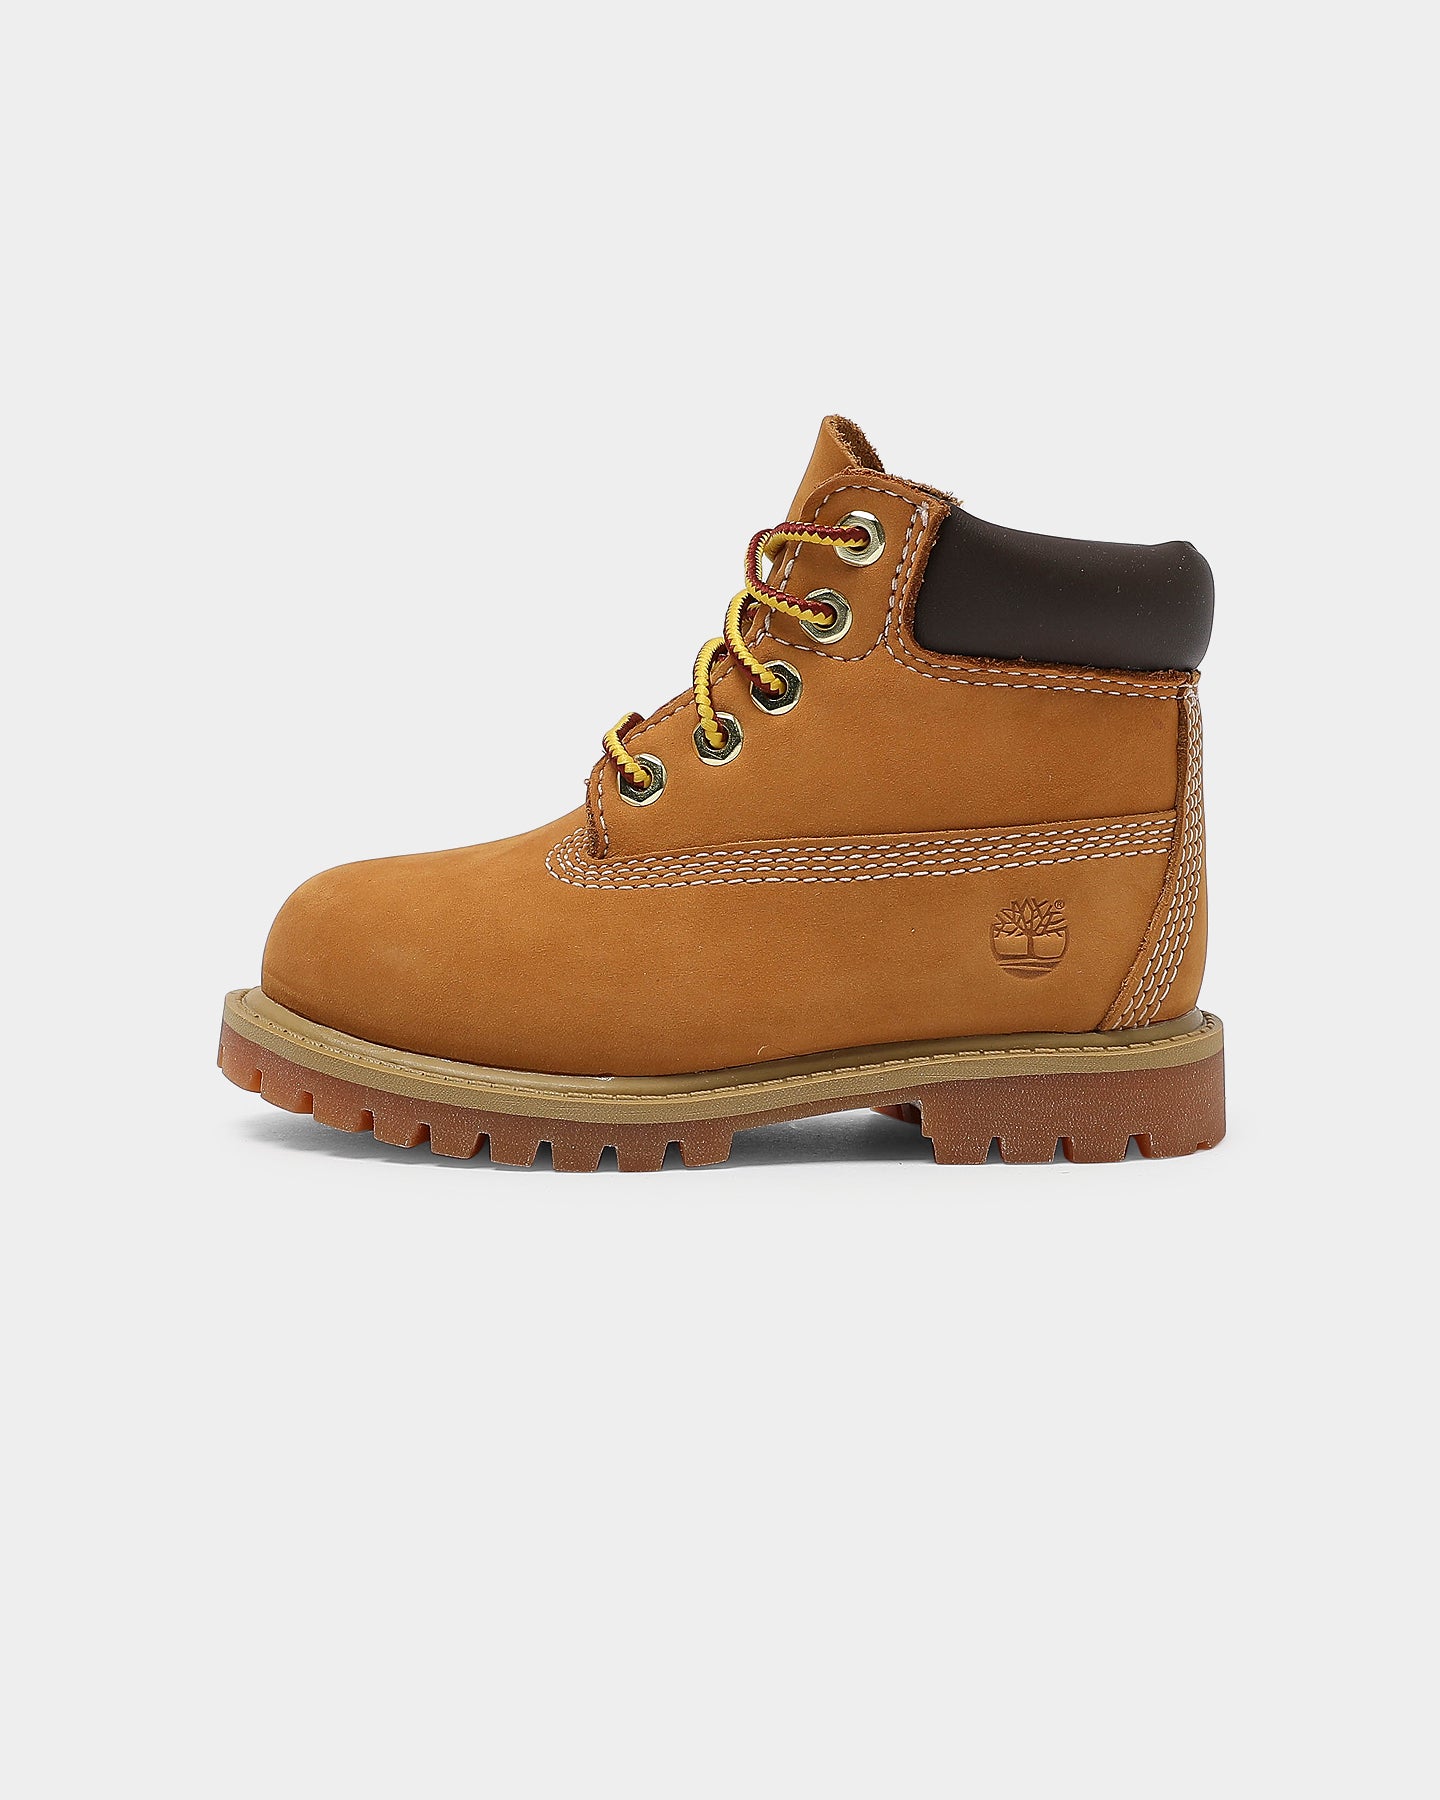 timberland shoes for babies